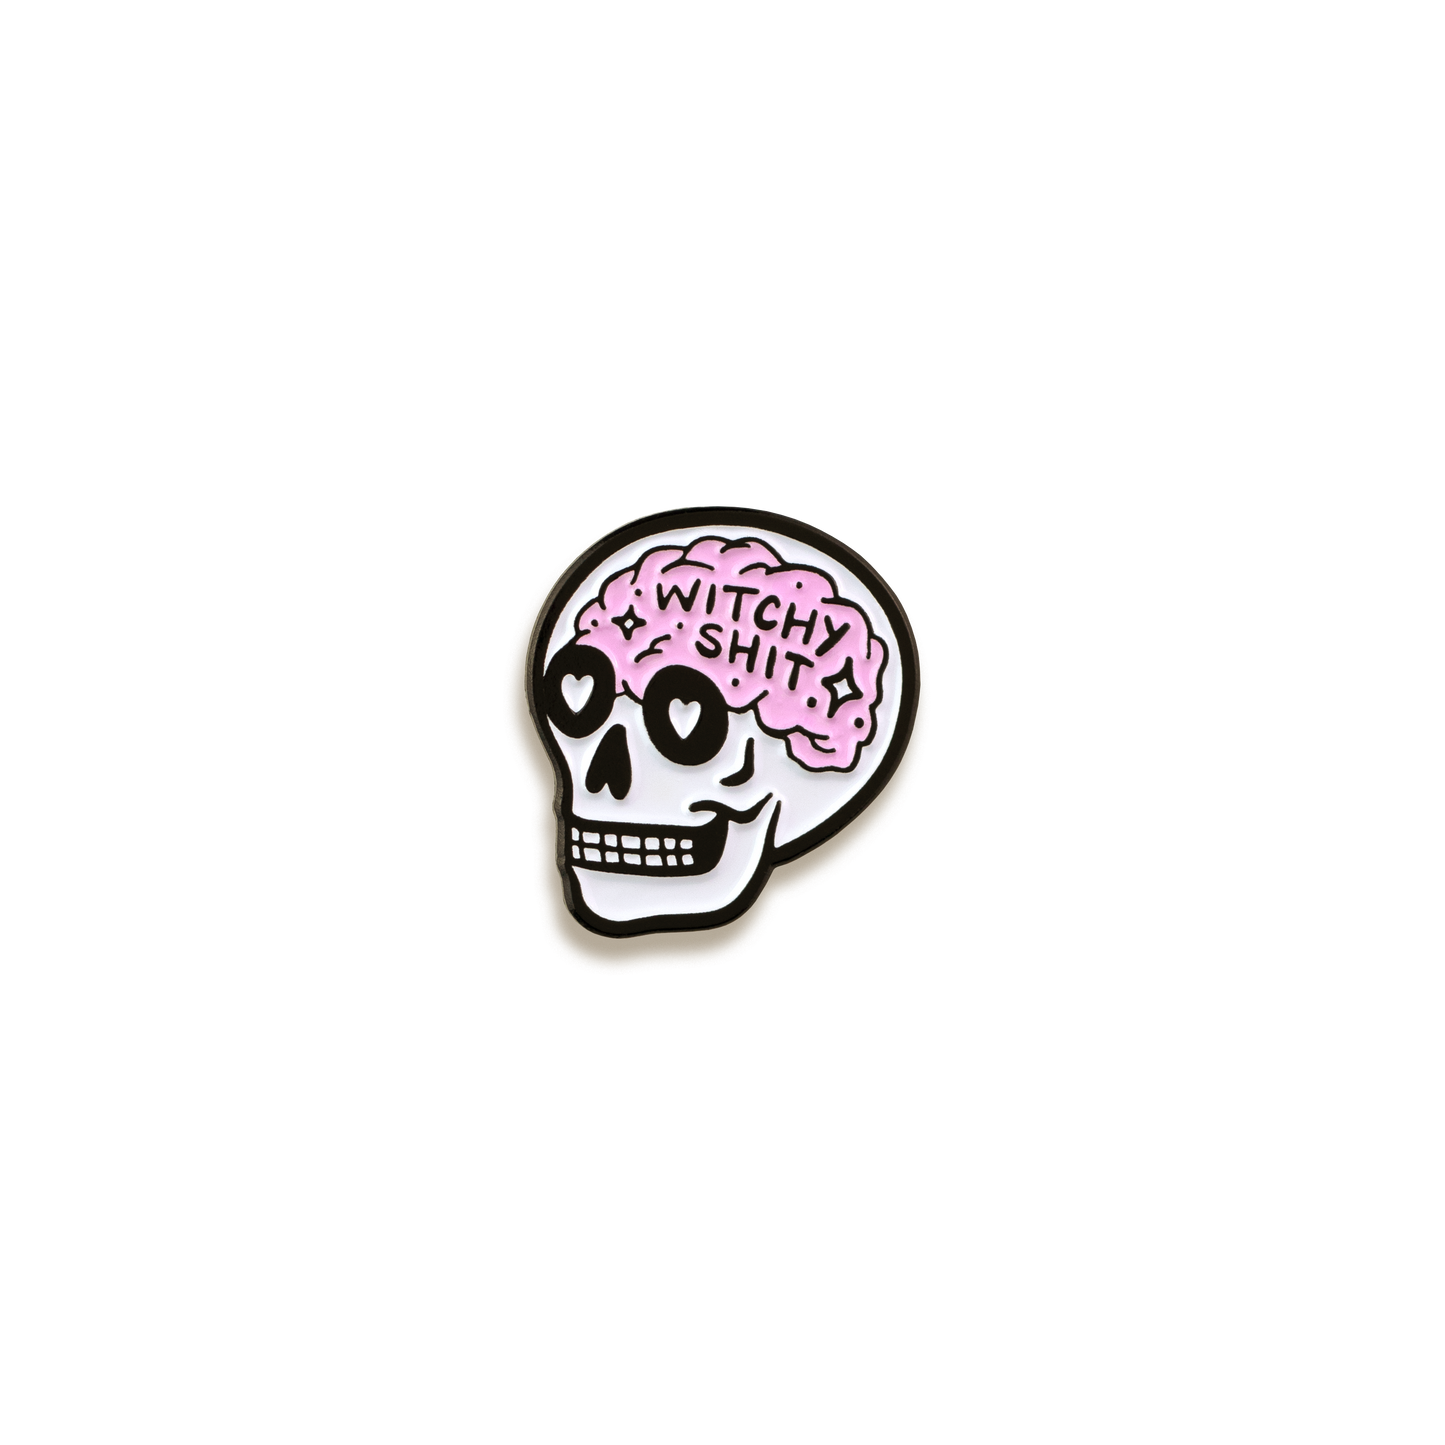 Witchy Shit Enamel Pin by Band of Weirdos